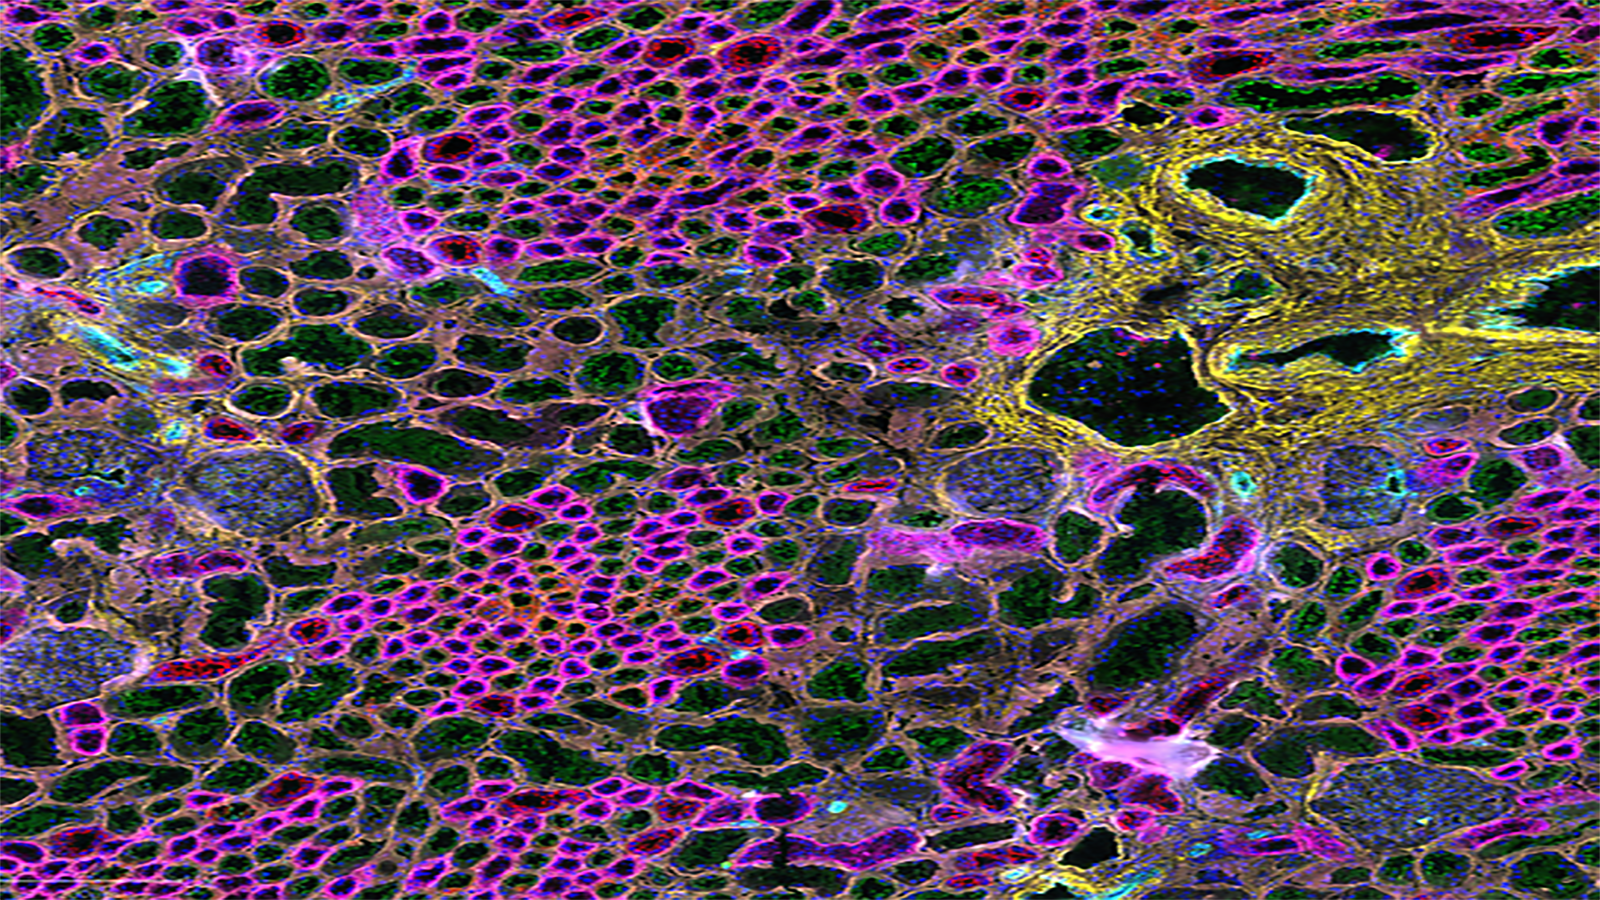 Cell DIVE image of healthy human kidney, courtesy of Christine Surrette and Dr. Elizabeth Neumann from GE Research and Vanderbilt (respectively)